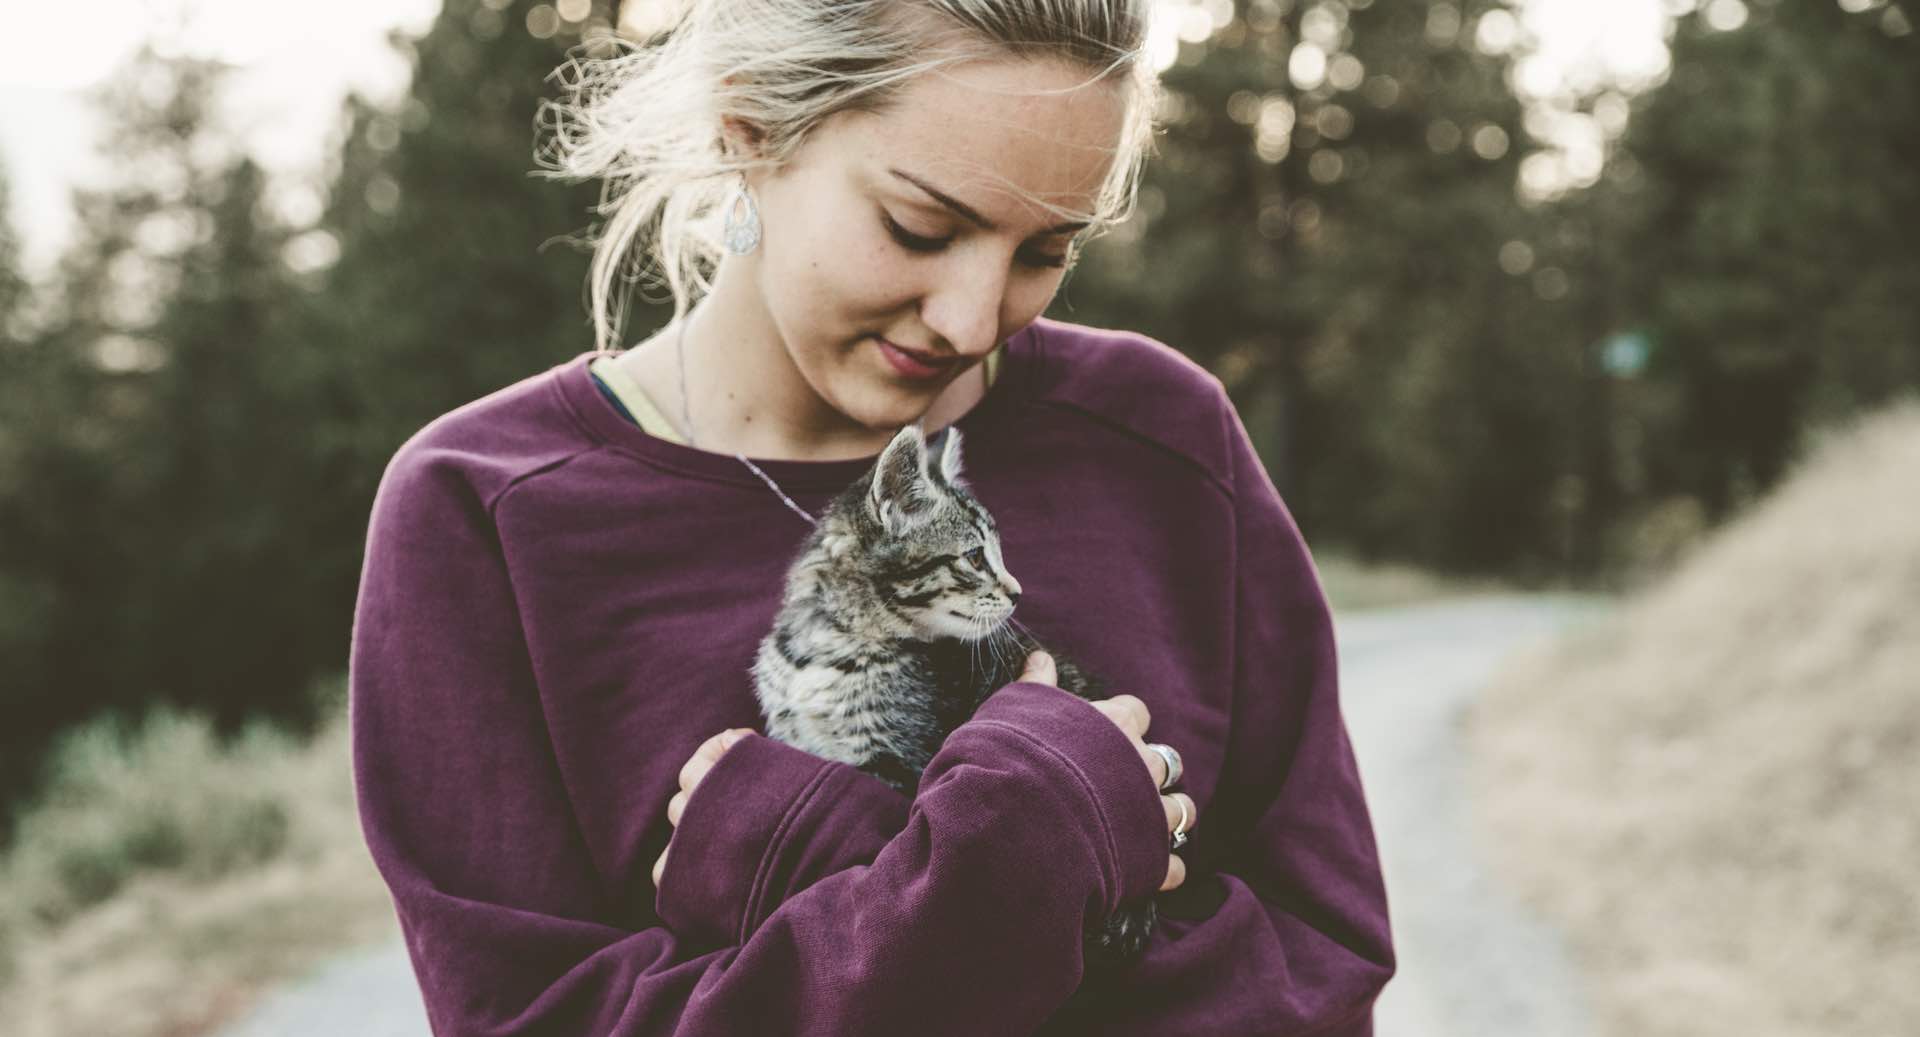 Pets transform our lives in more ways than one. Here’s why.